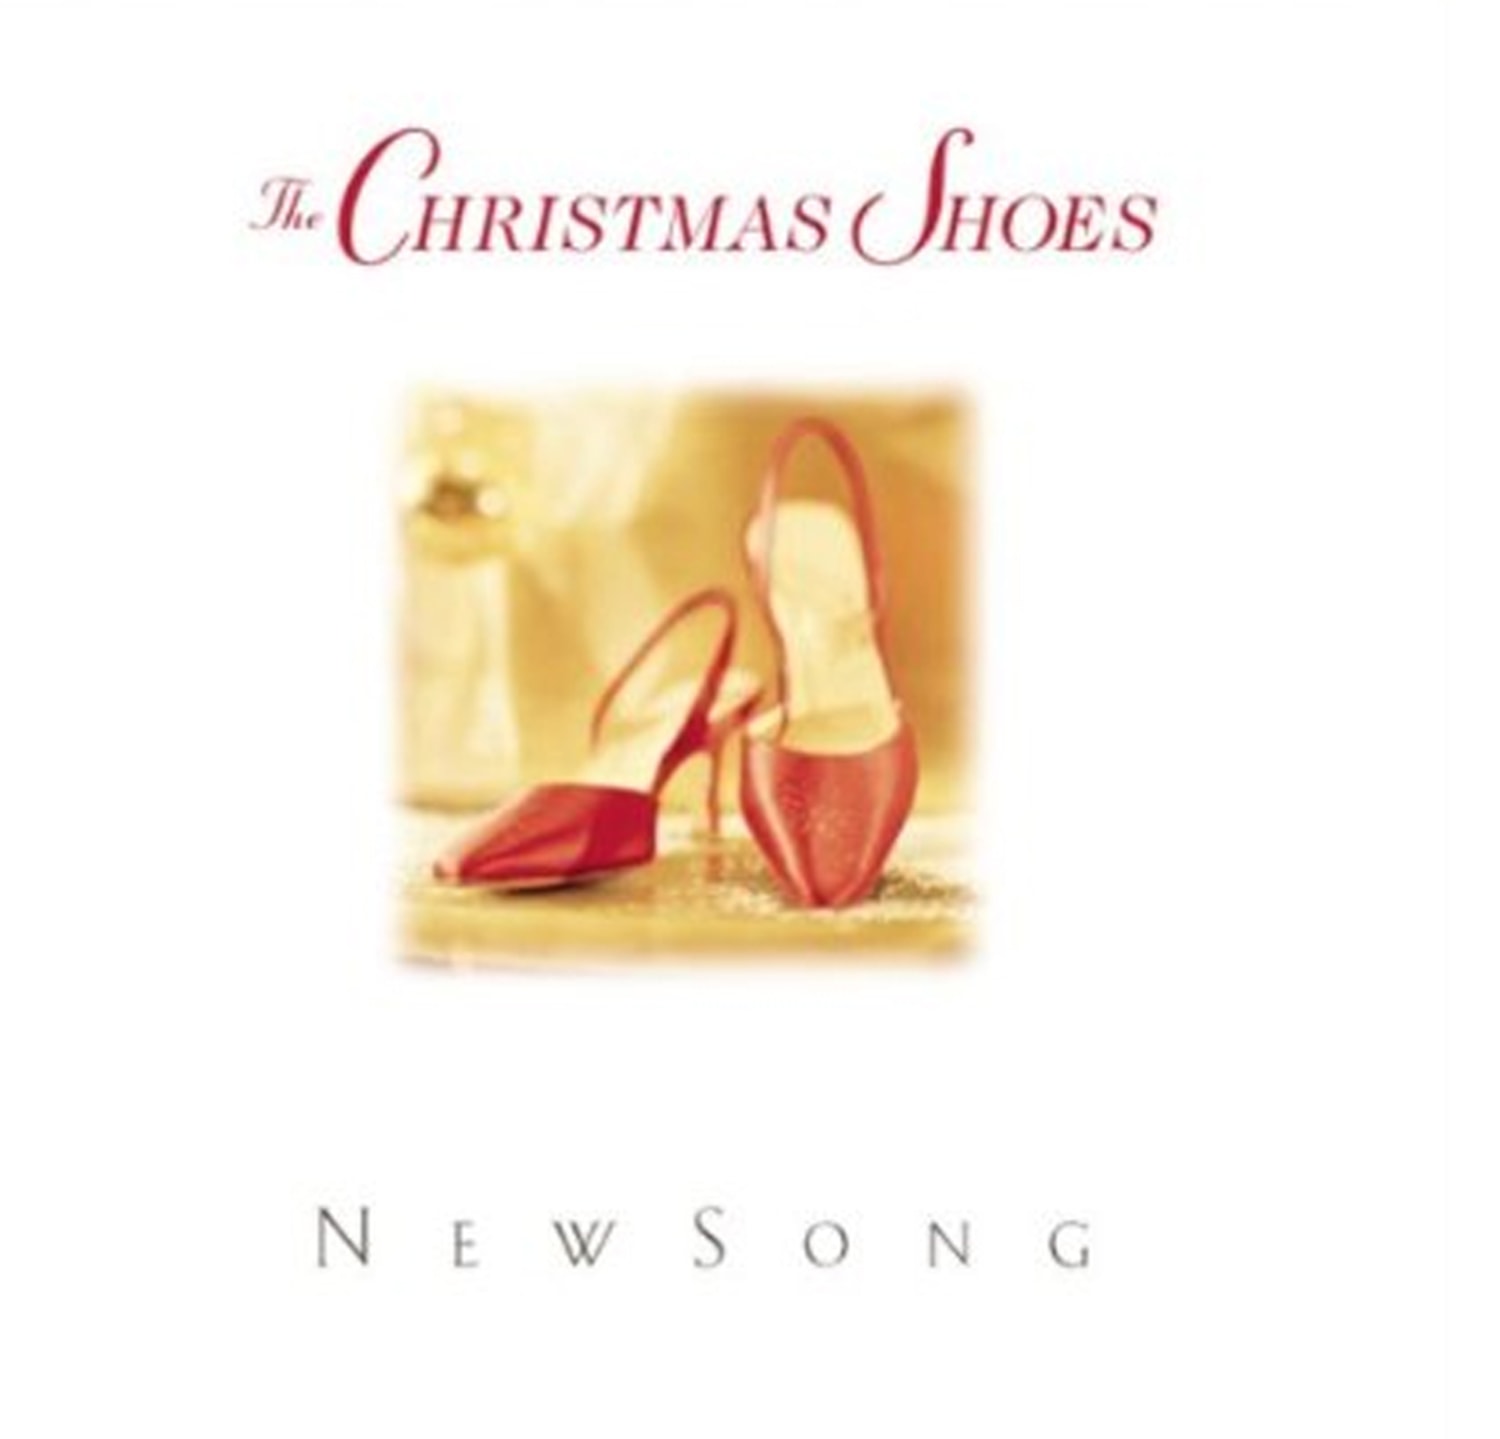 Is 'Christmas Shoes' the worst holiday song ever?